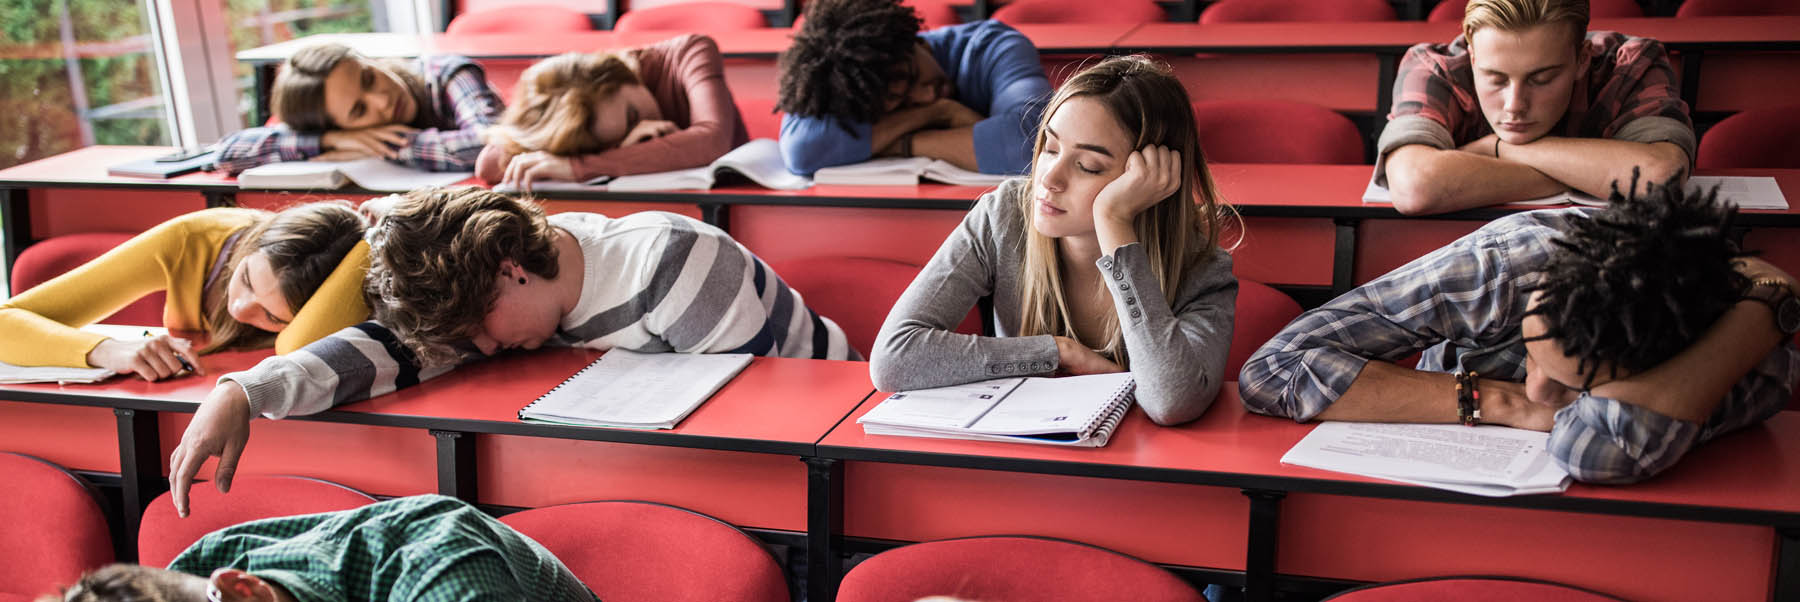 Teens are tired in class because their sleep cycles change during puberty.